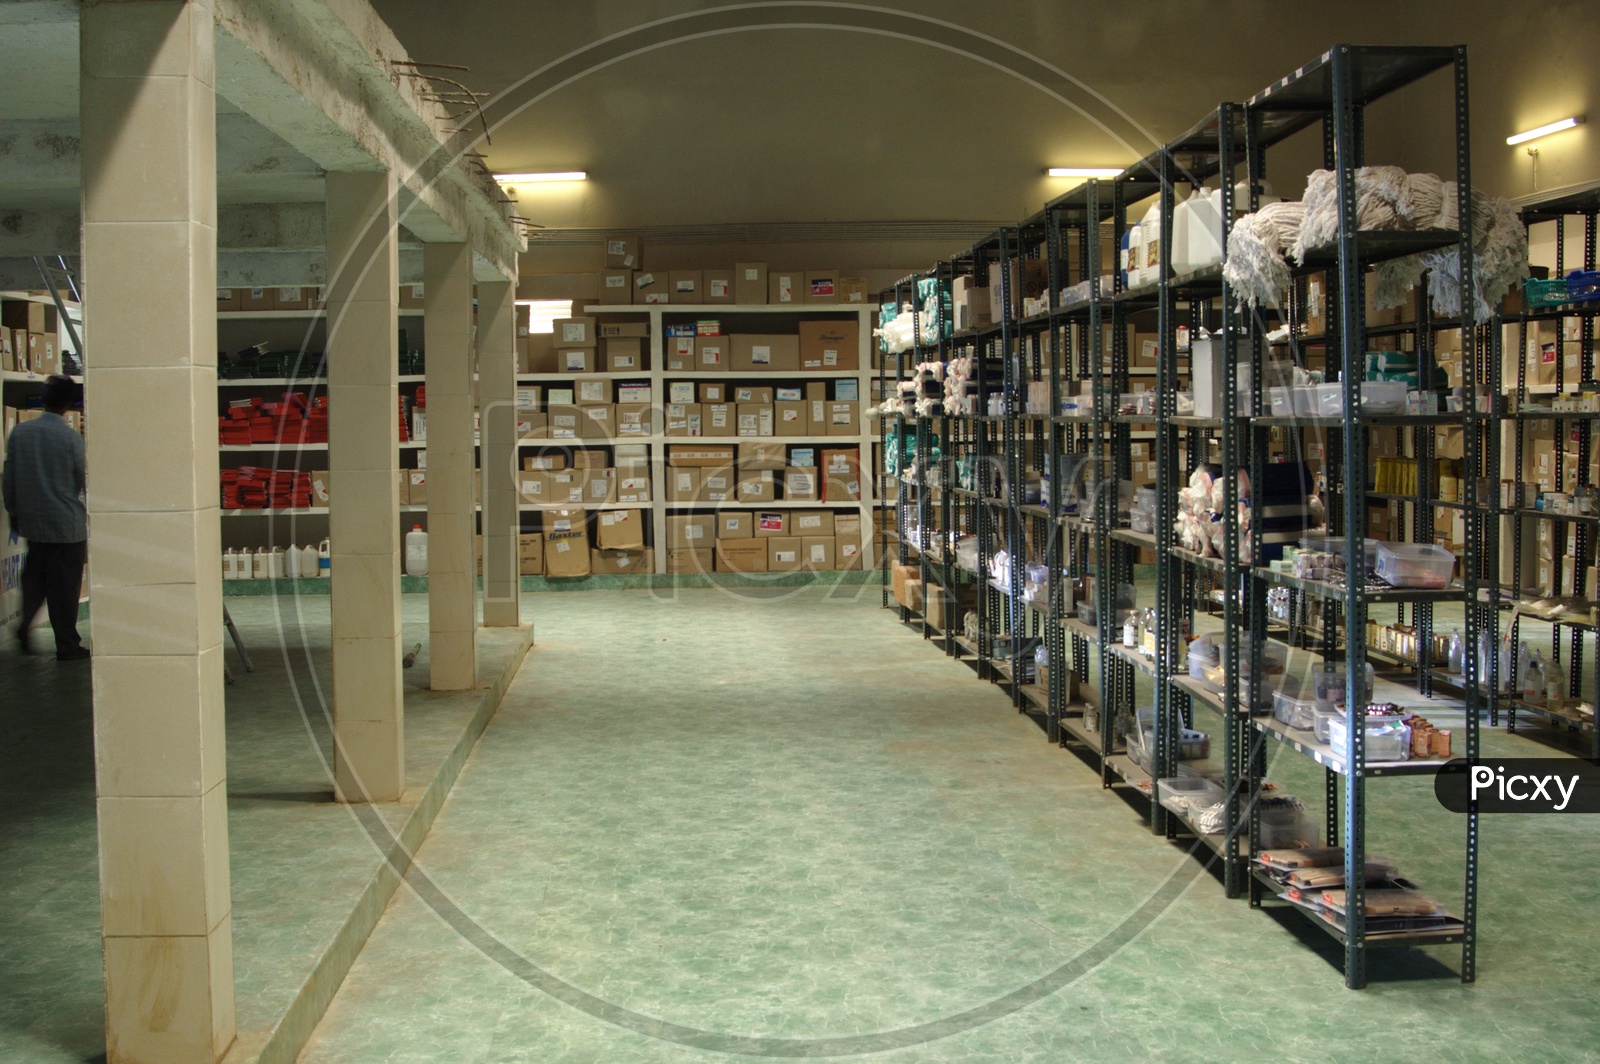 Hospital Store Room With Medicines Stock in Racks